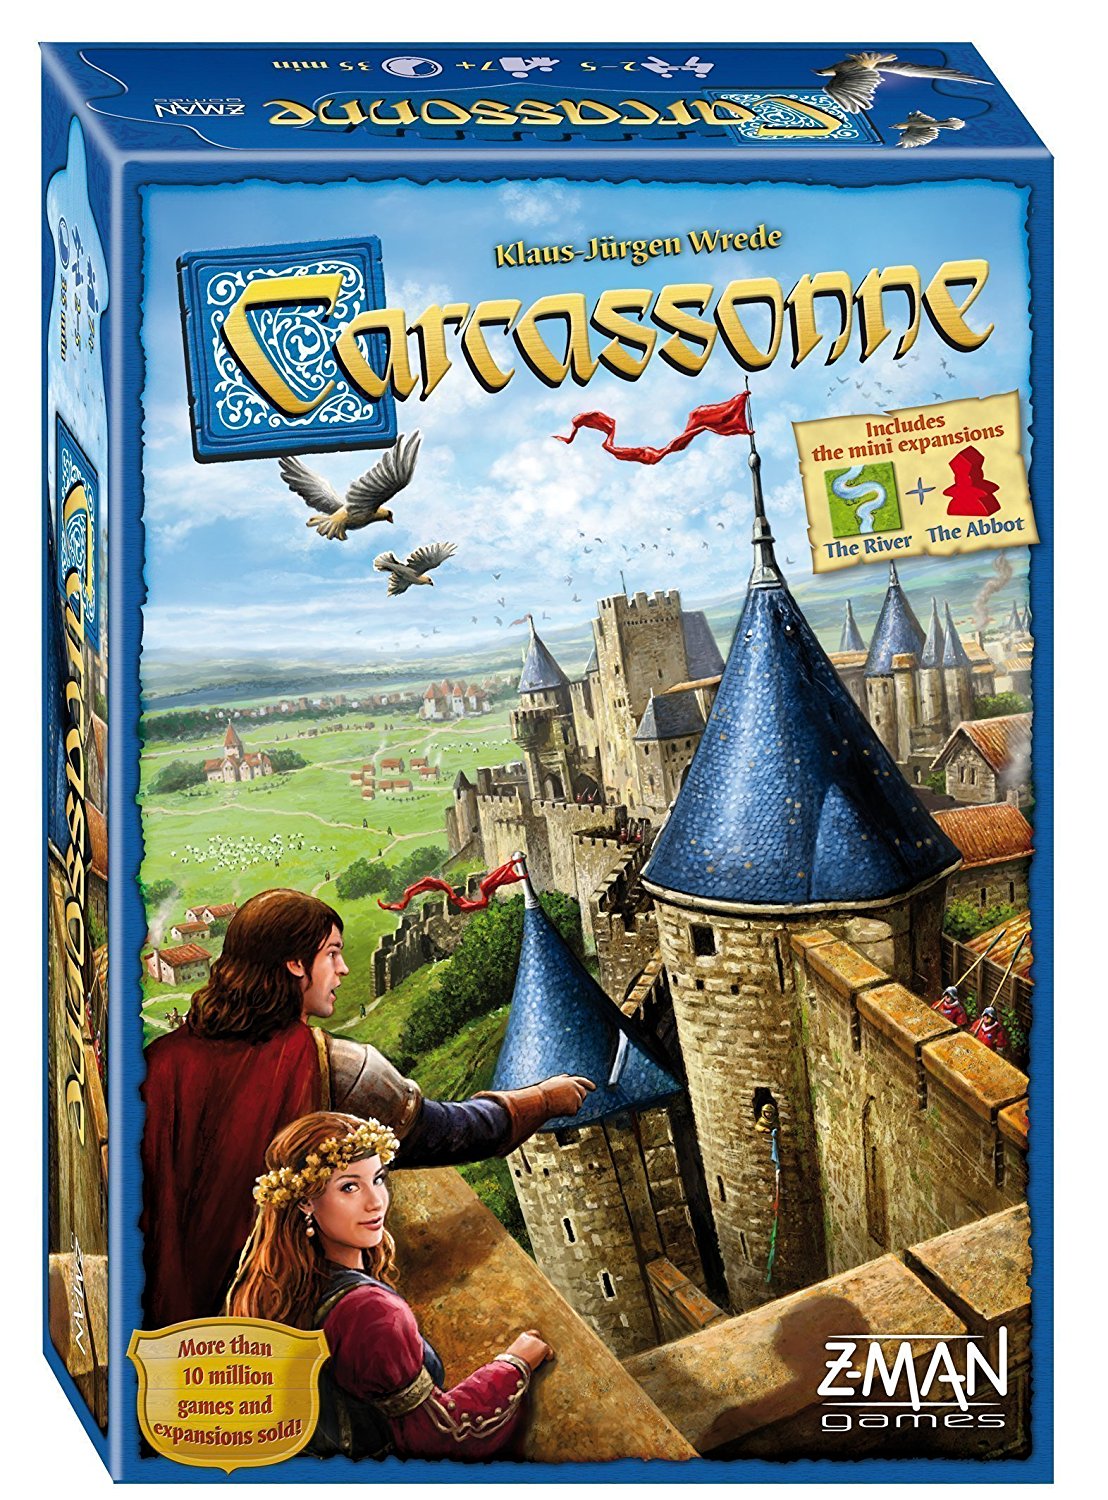 Carcassonne - Board Game - The Hooded Goblin